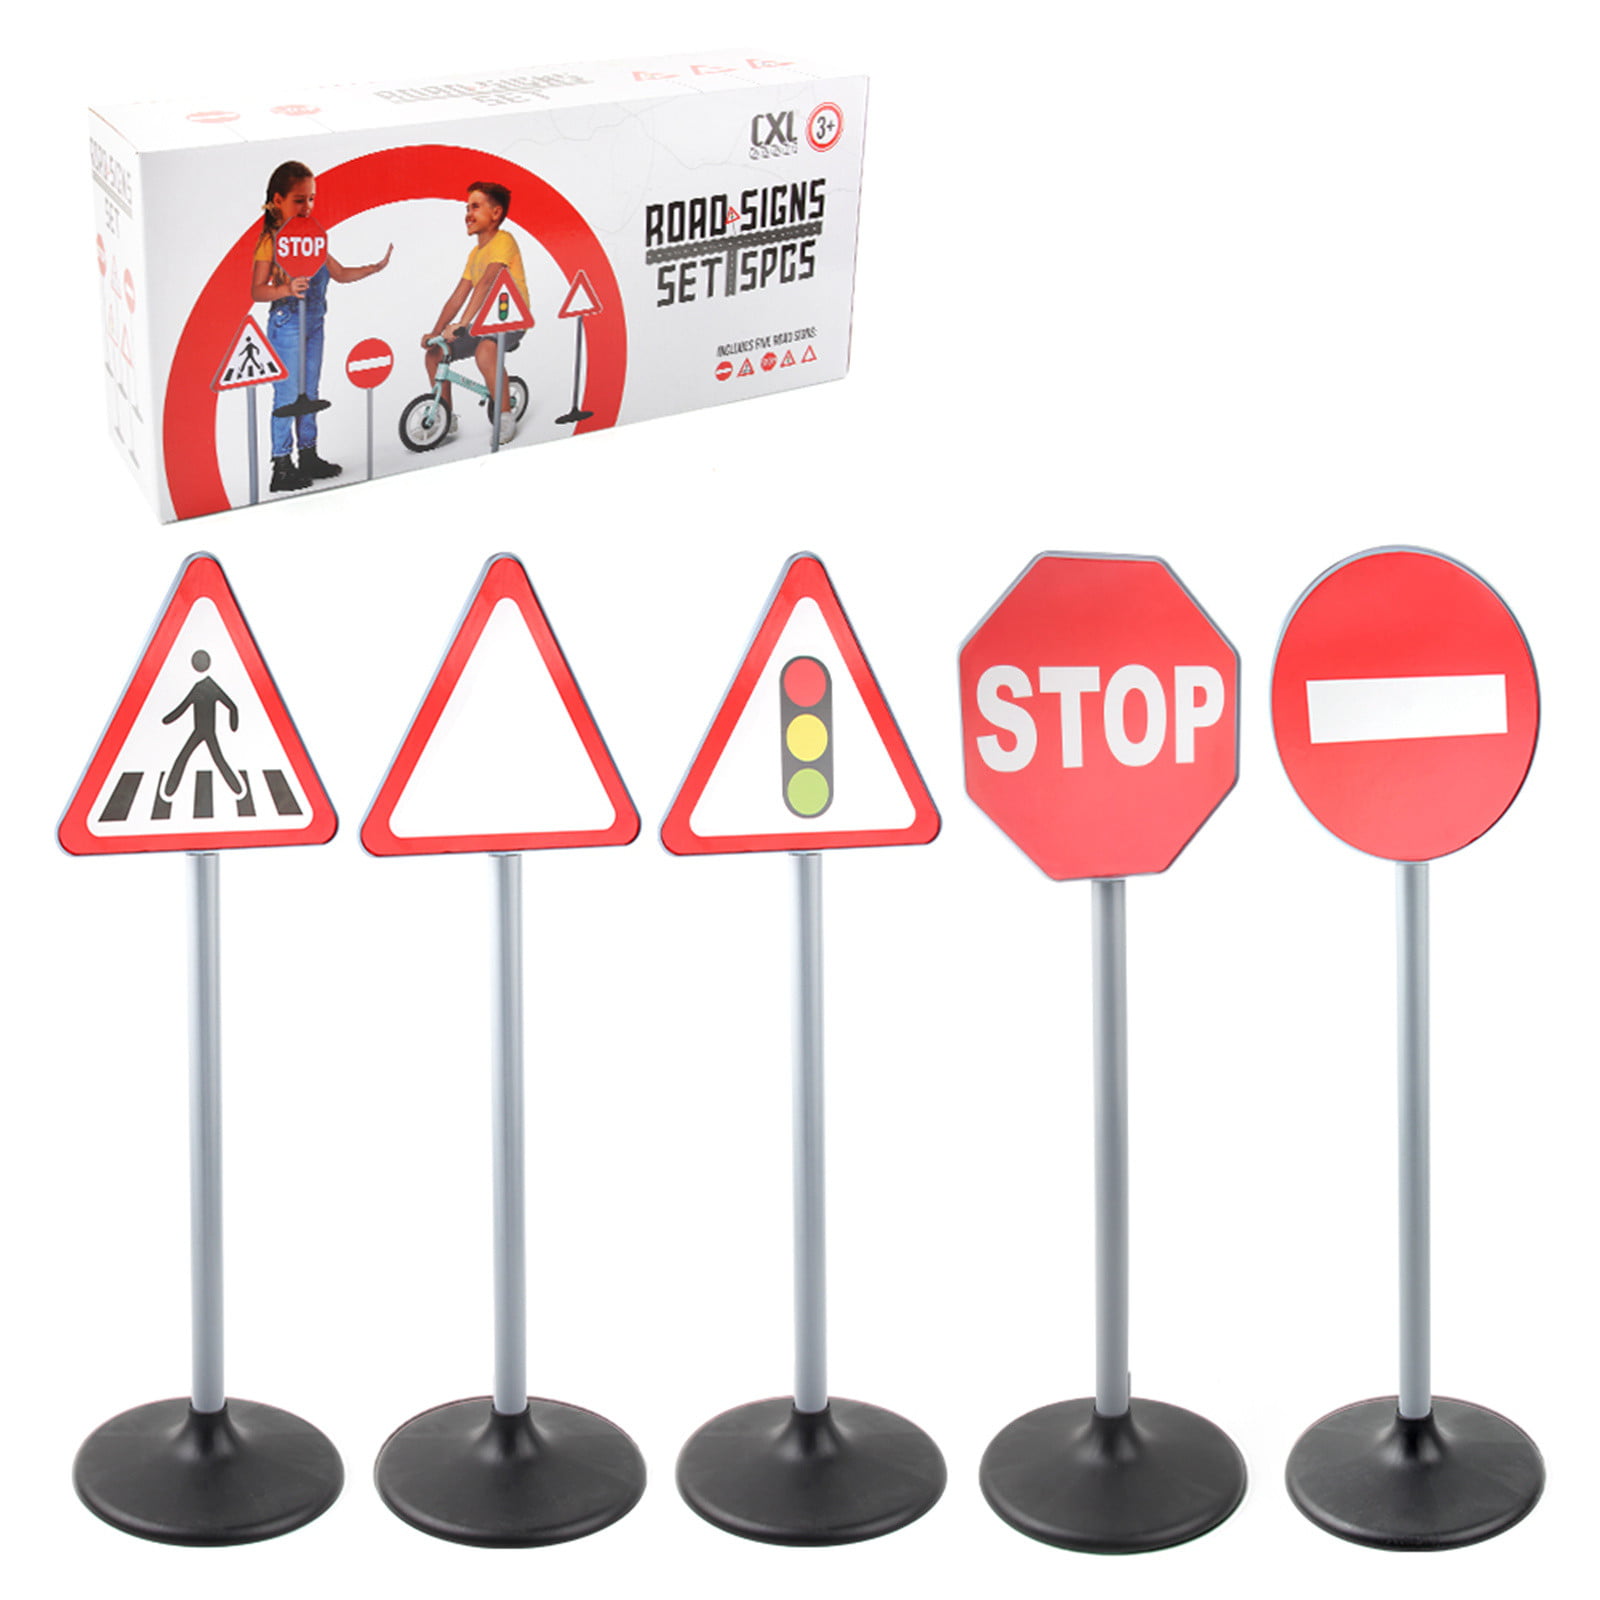 Details about   Mini Traffic Light Road Sign With LED Light Sound Children Safety Education Gift 